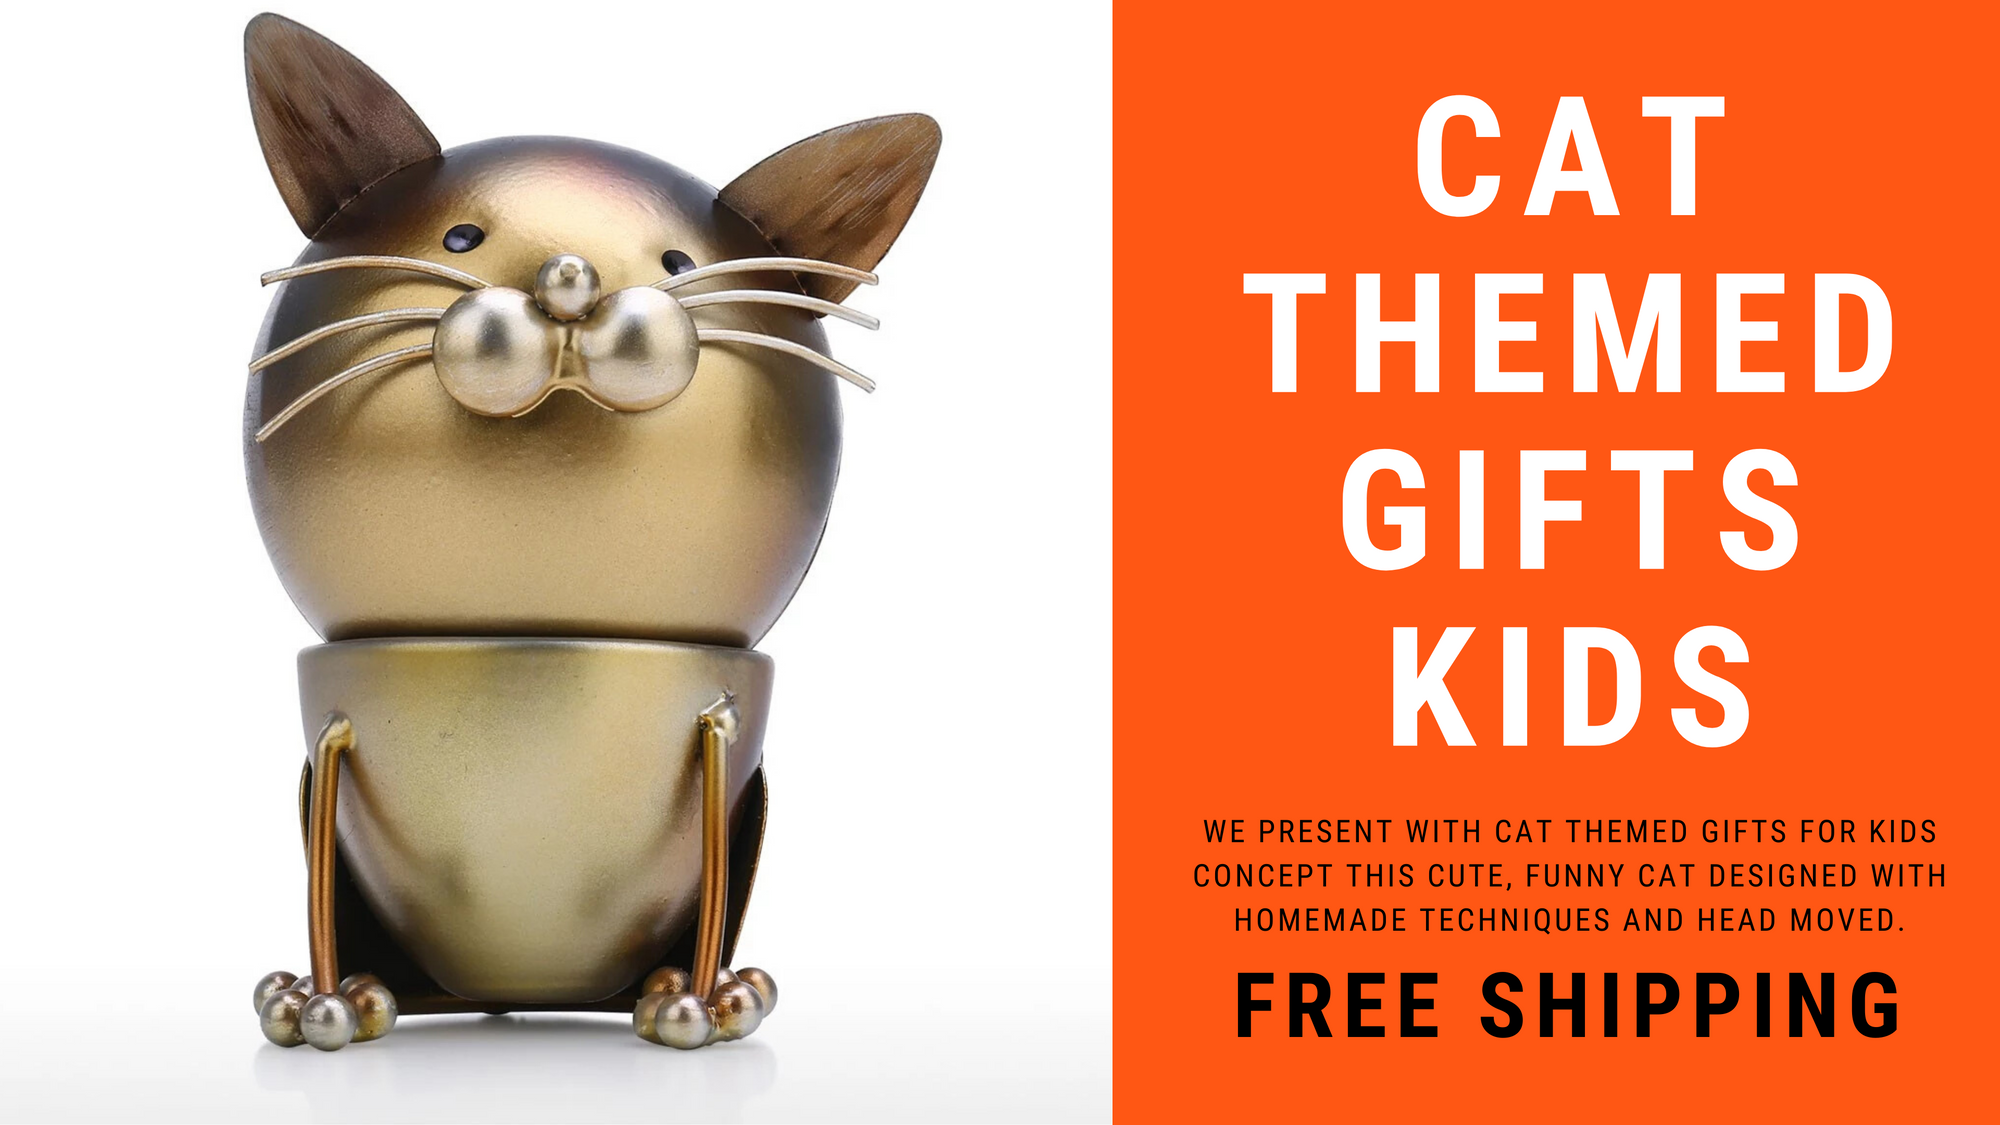 Who wouldn't Want an Baby-Cute Cat Adoption: as Gifts, Decor, Ornaments